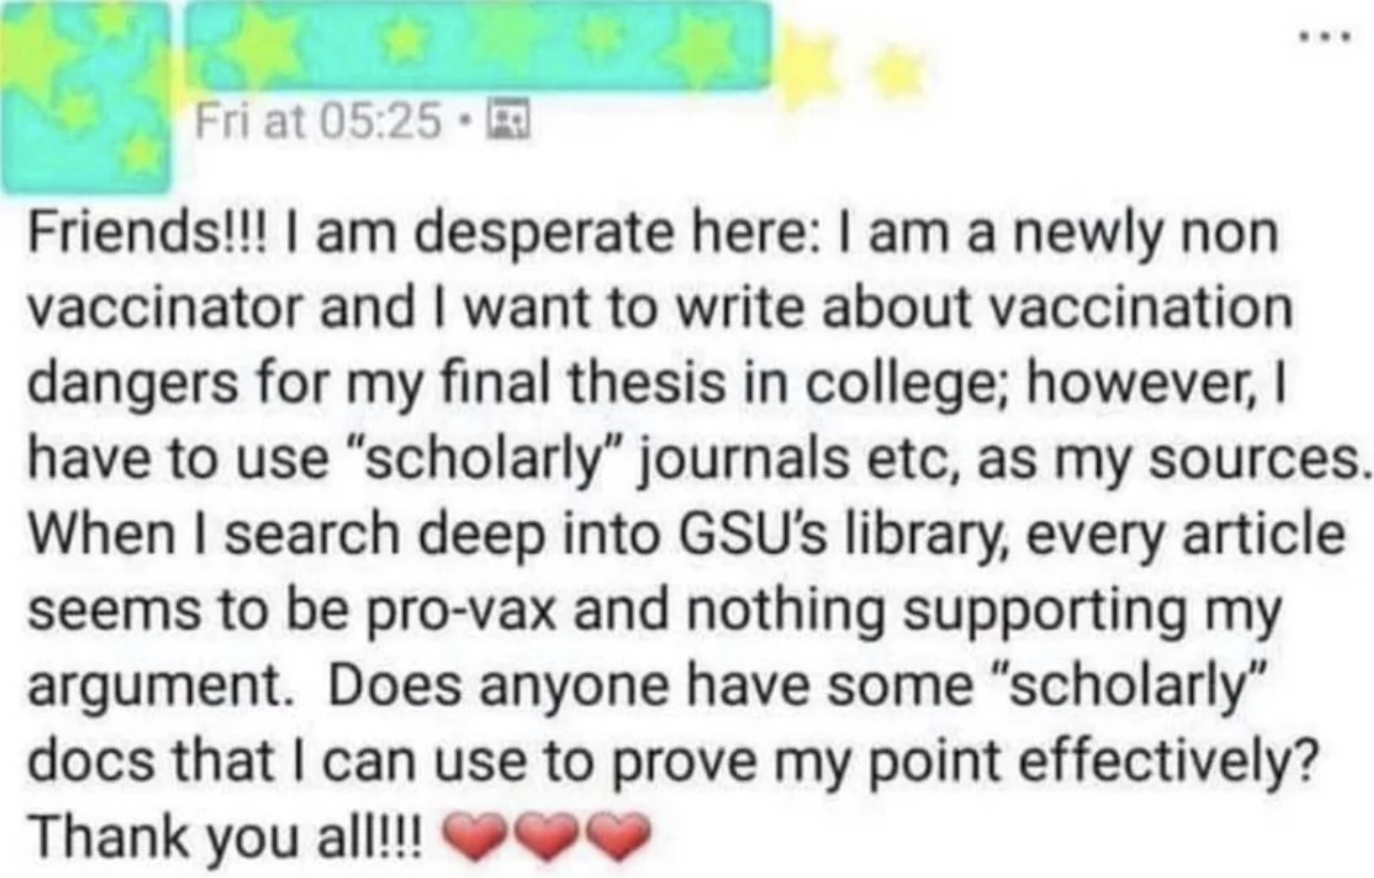 screenshot - Fri at Friends!!! I am desperate here I am a newly non vaccinator and I want to write about vaccination dangers for my final thesis in college; however, I have to use